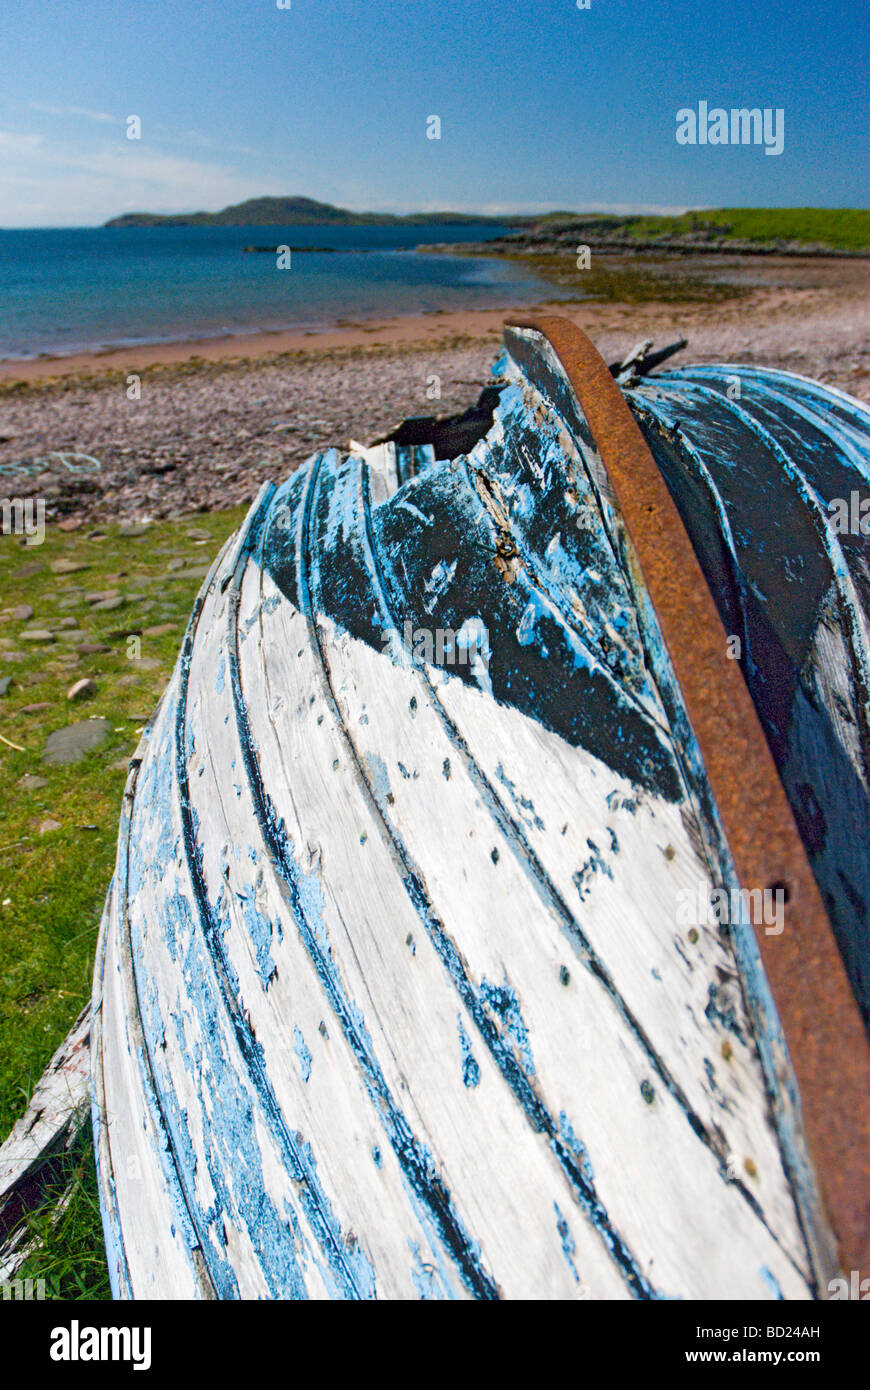 An upturned boat on a Scottish shore Stock Photo